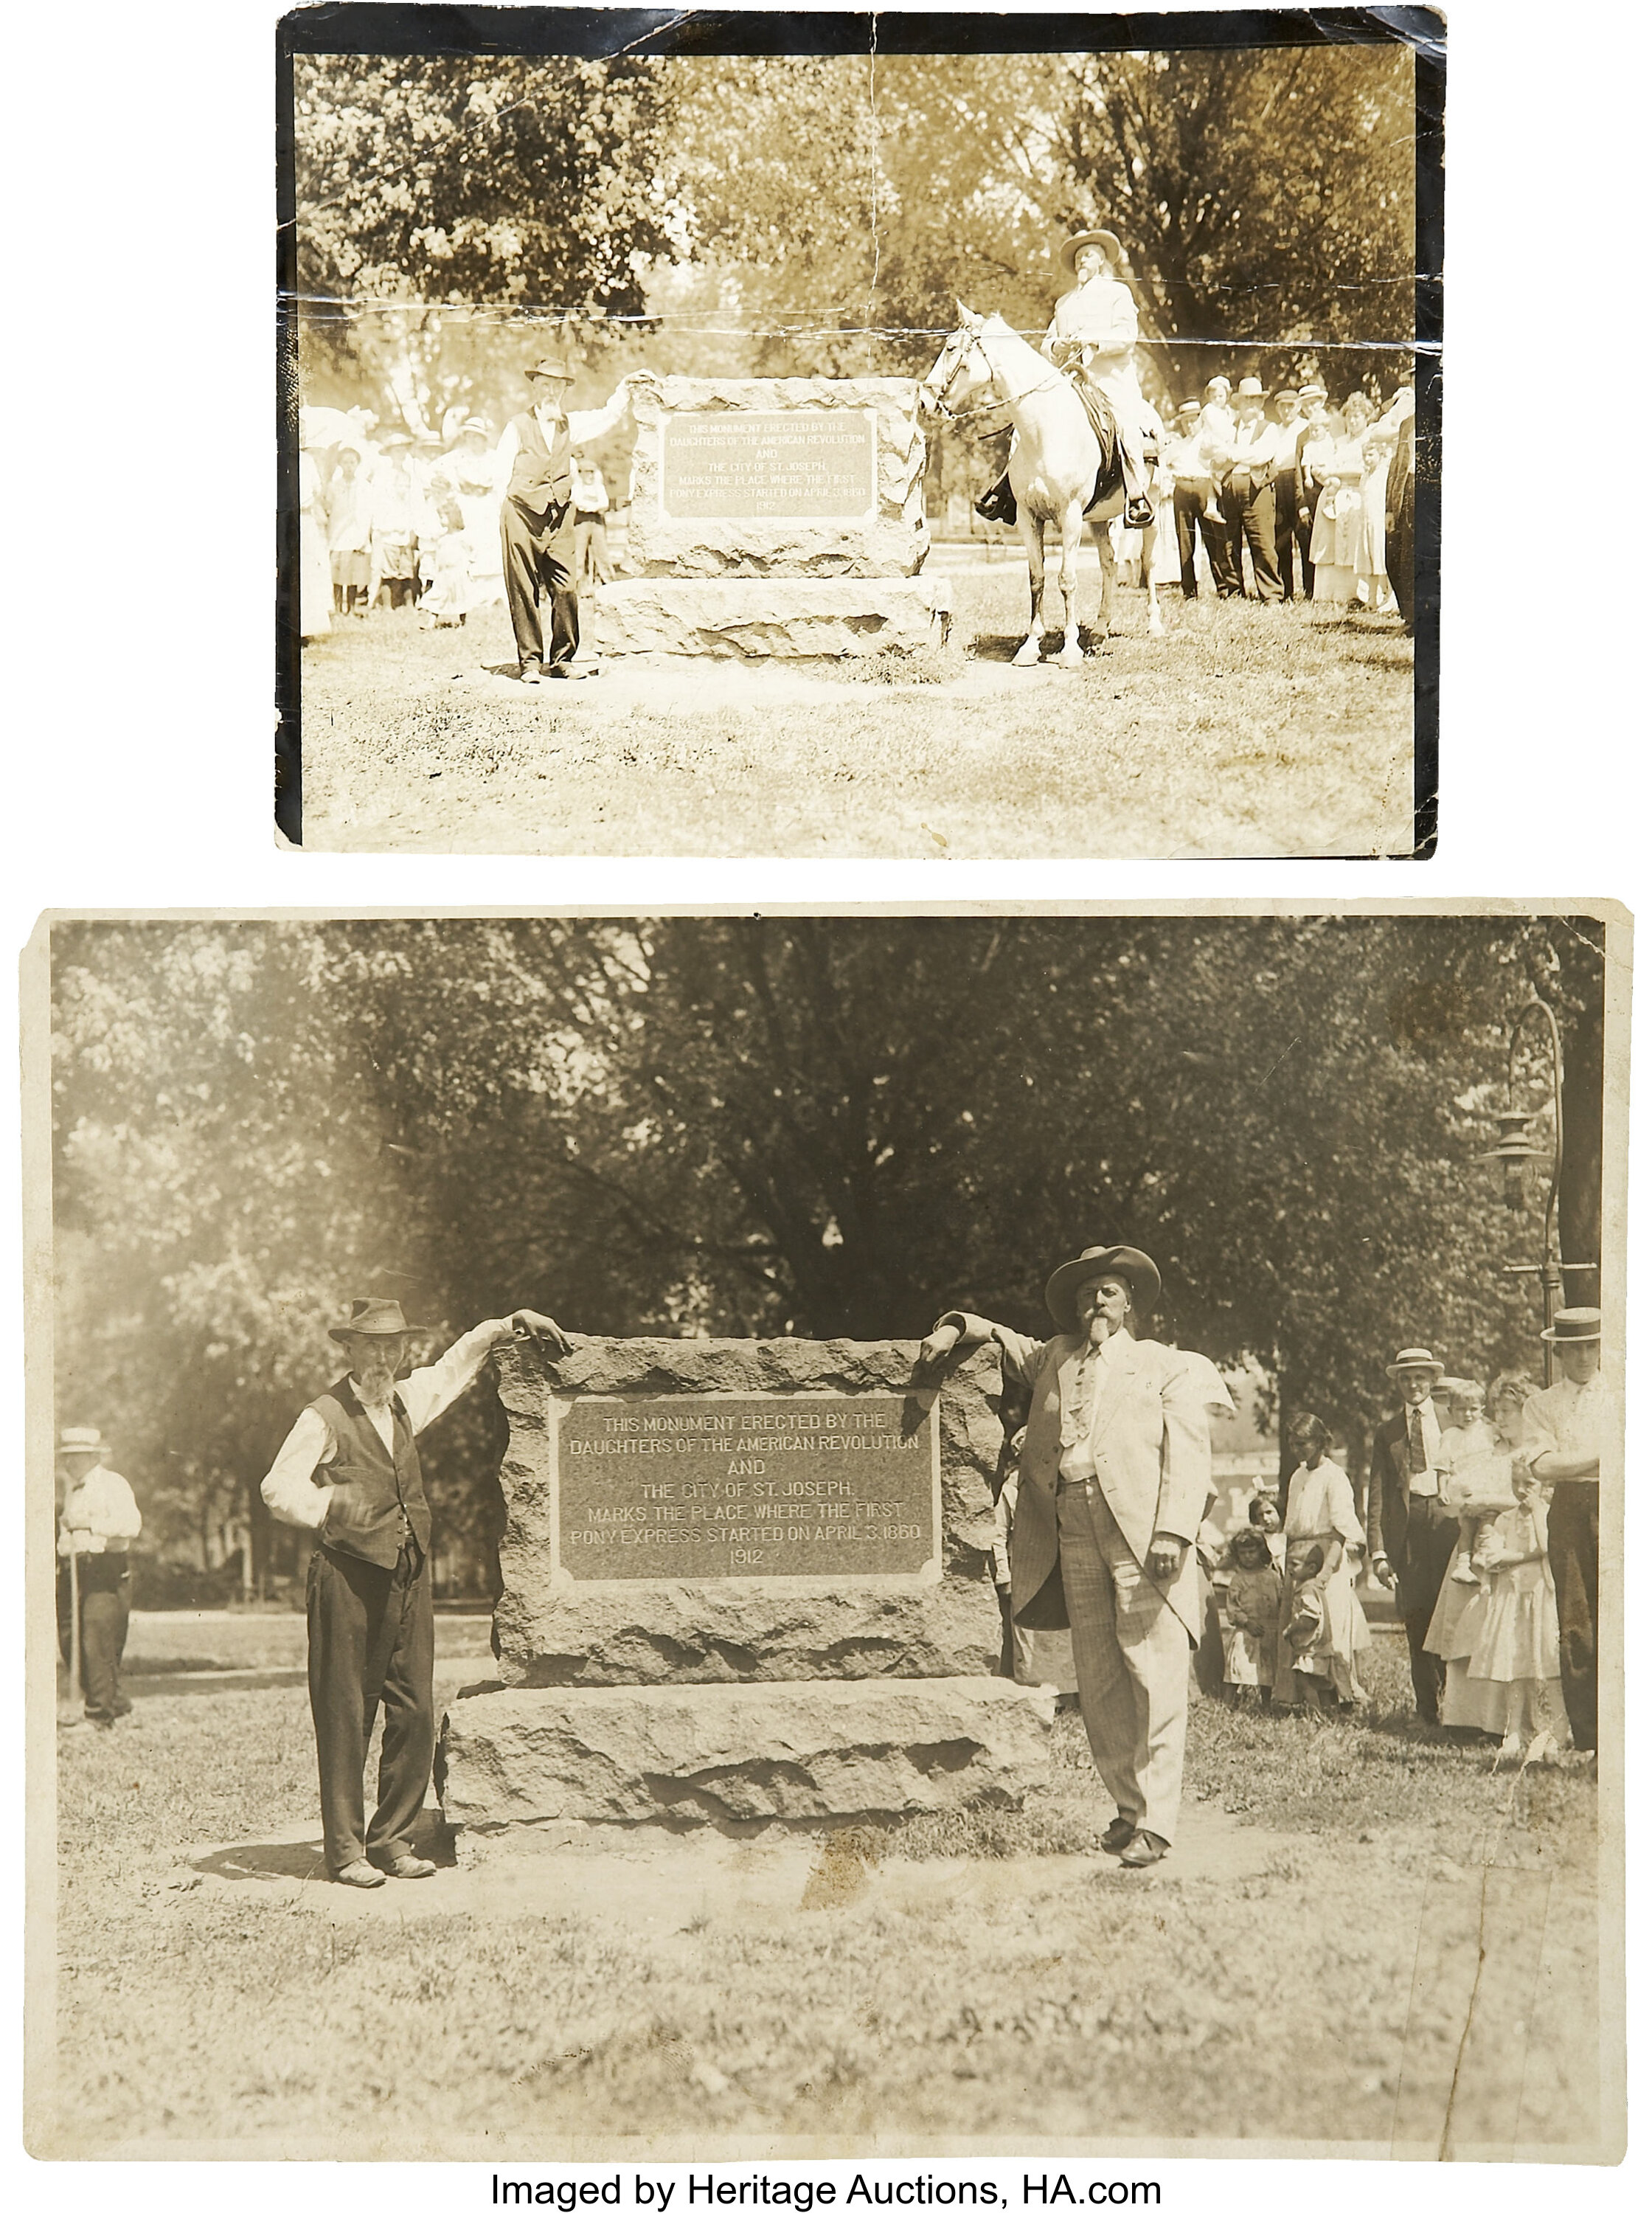 Two Photographs of Buffalo Bill Cody at the Dedication of A Pony | Lot Heritage Auctions